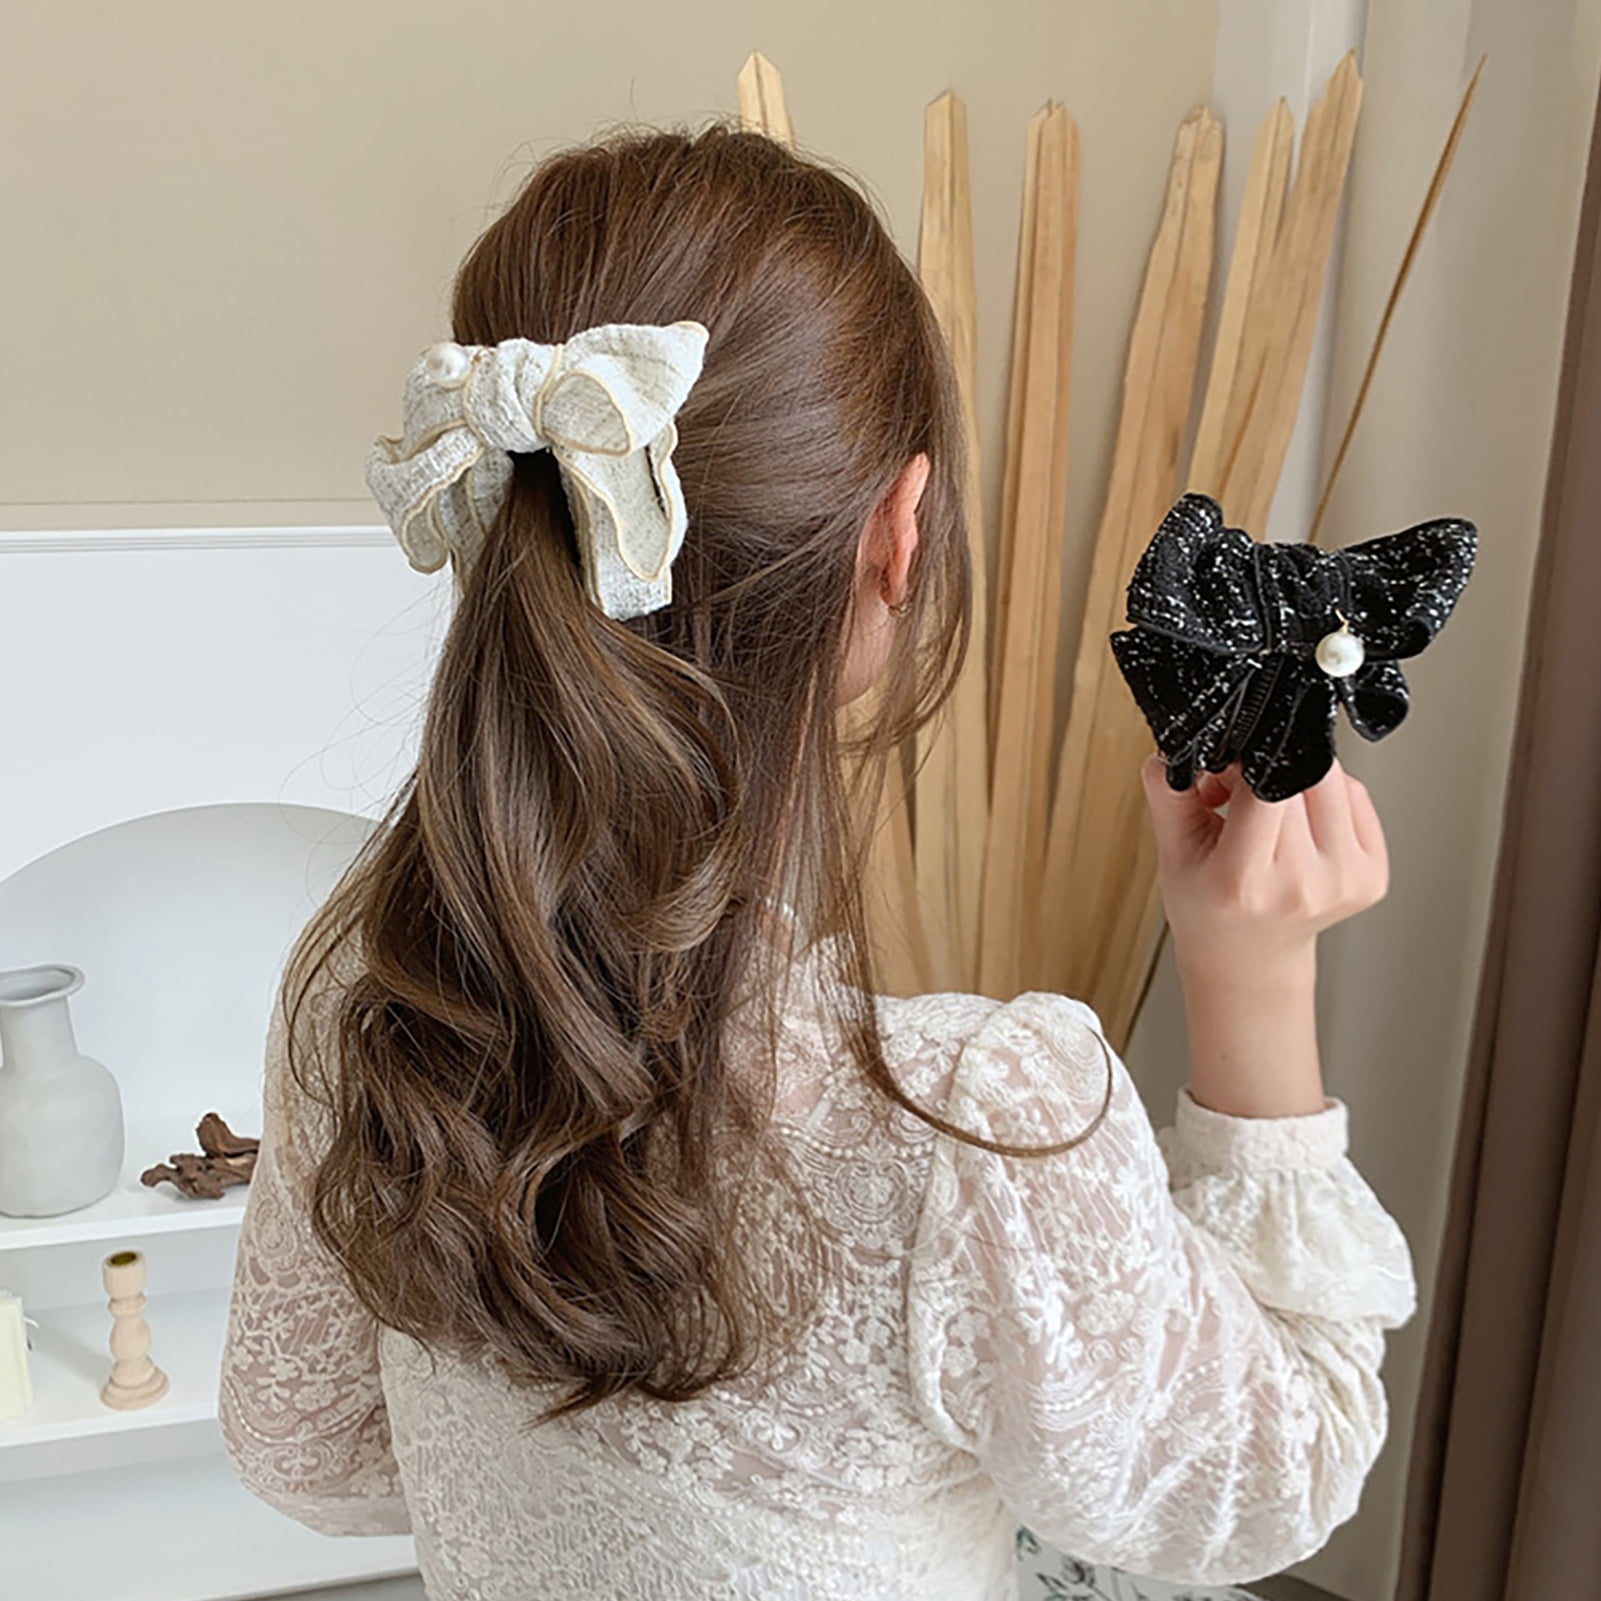 Bow Hair Clips for Girls Red Hair Bow Barrettes for Little Girls Cute Hair  Accessories for Girls 2pcs Bowknot Hair Clip